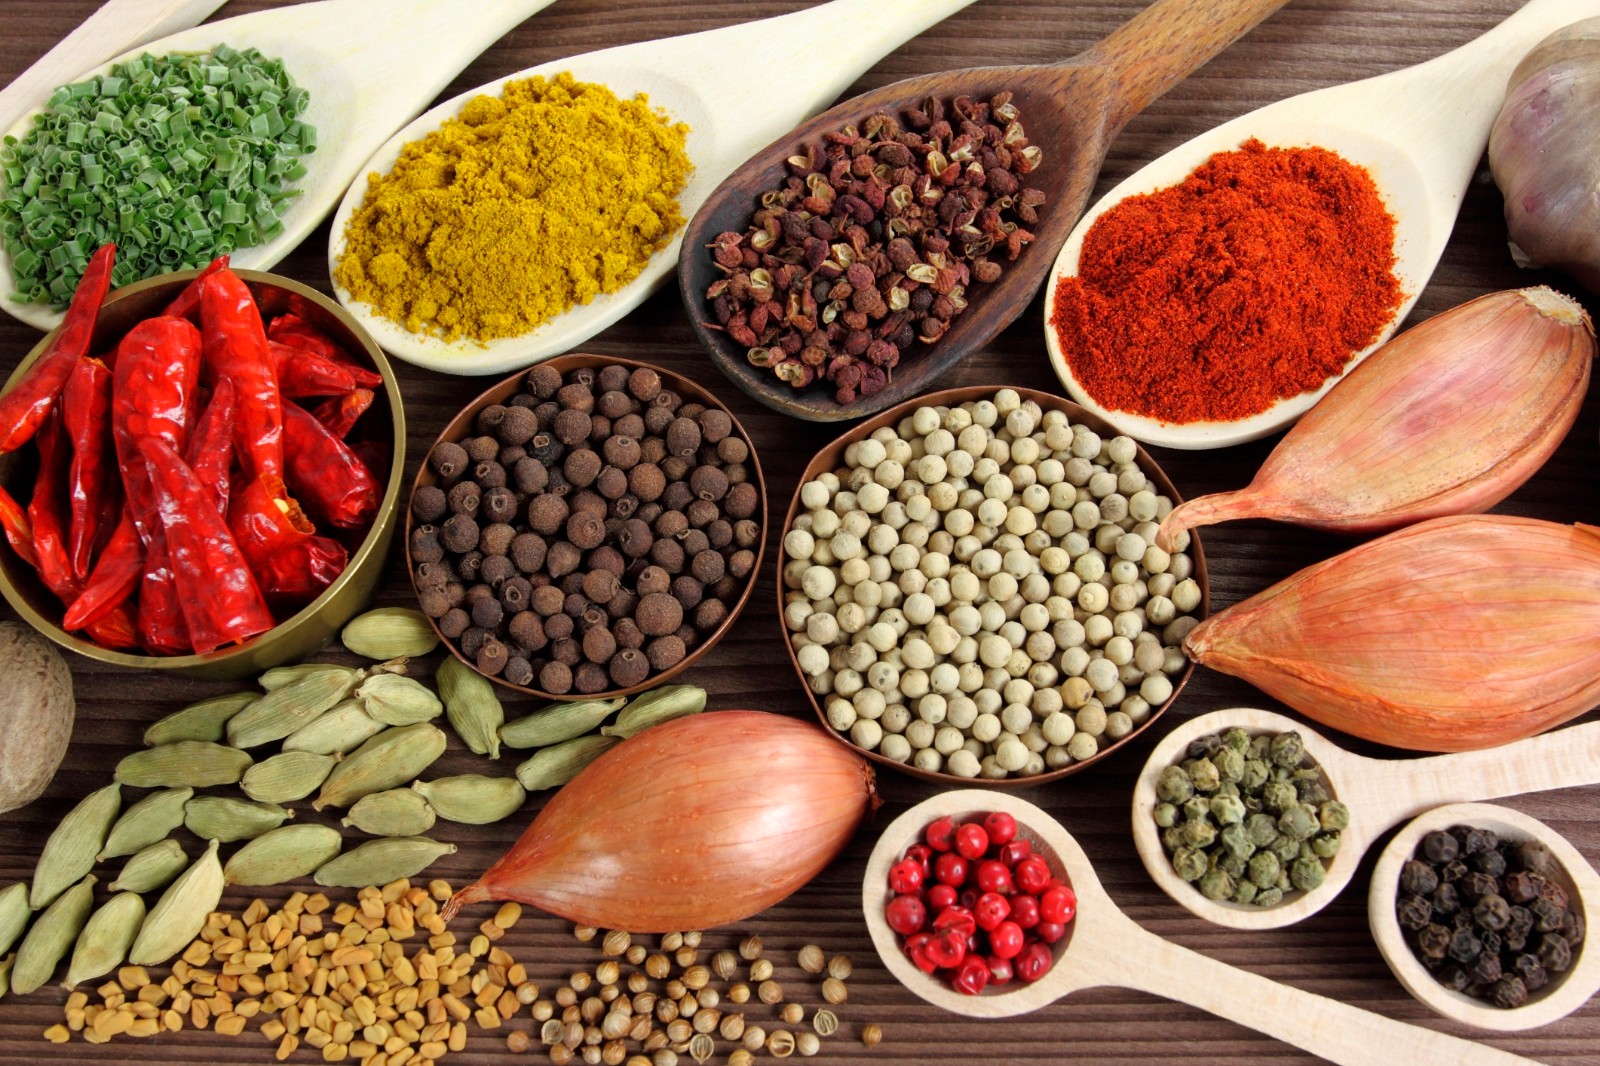 Future of food-Assortment of Spices and Ingredients.jpg